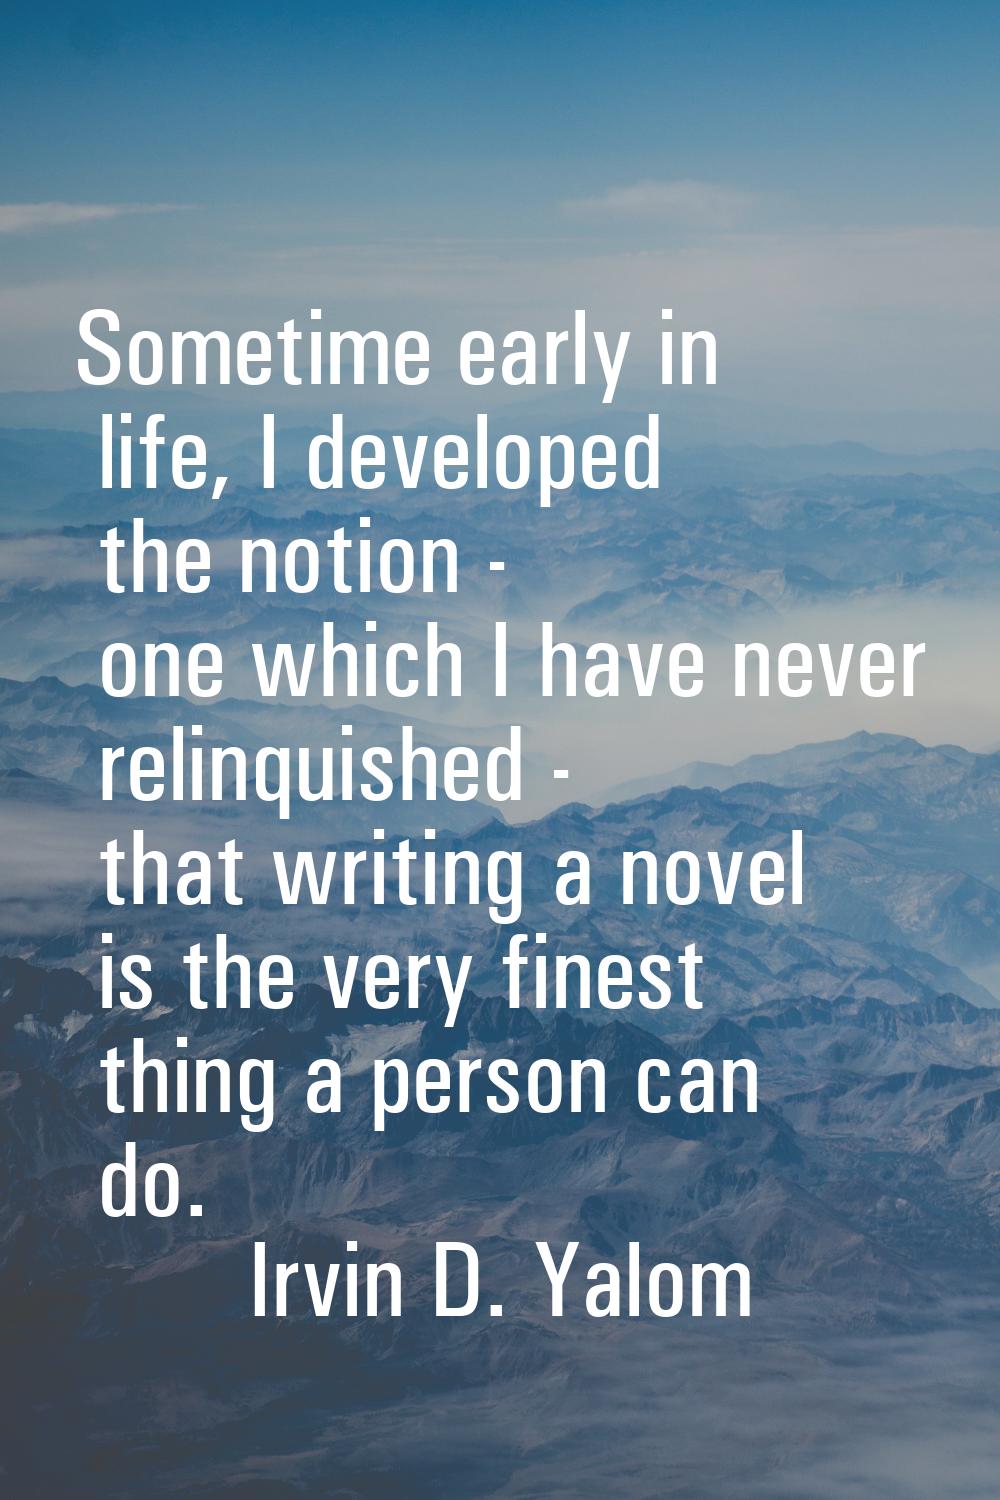 Sometime early in life, I developed the notion - one which I have never relinquished - that writing